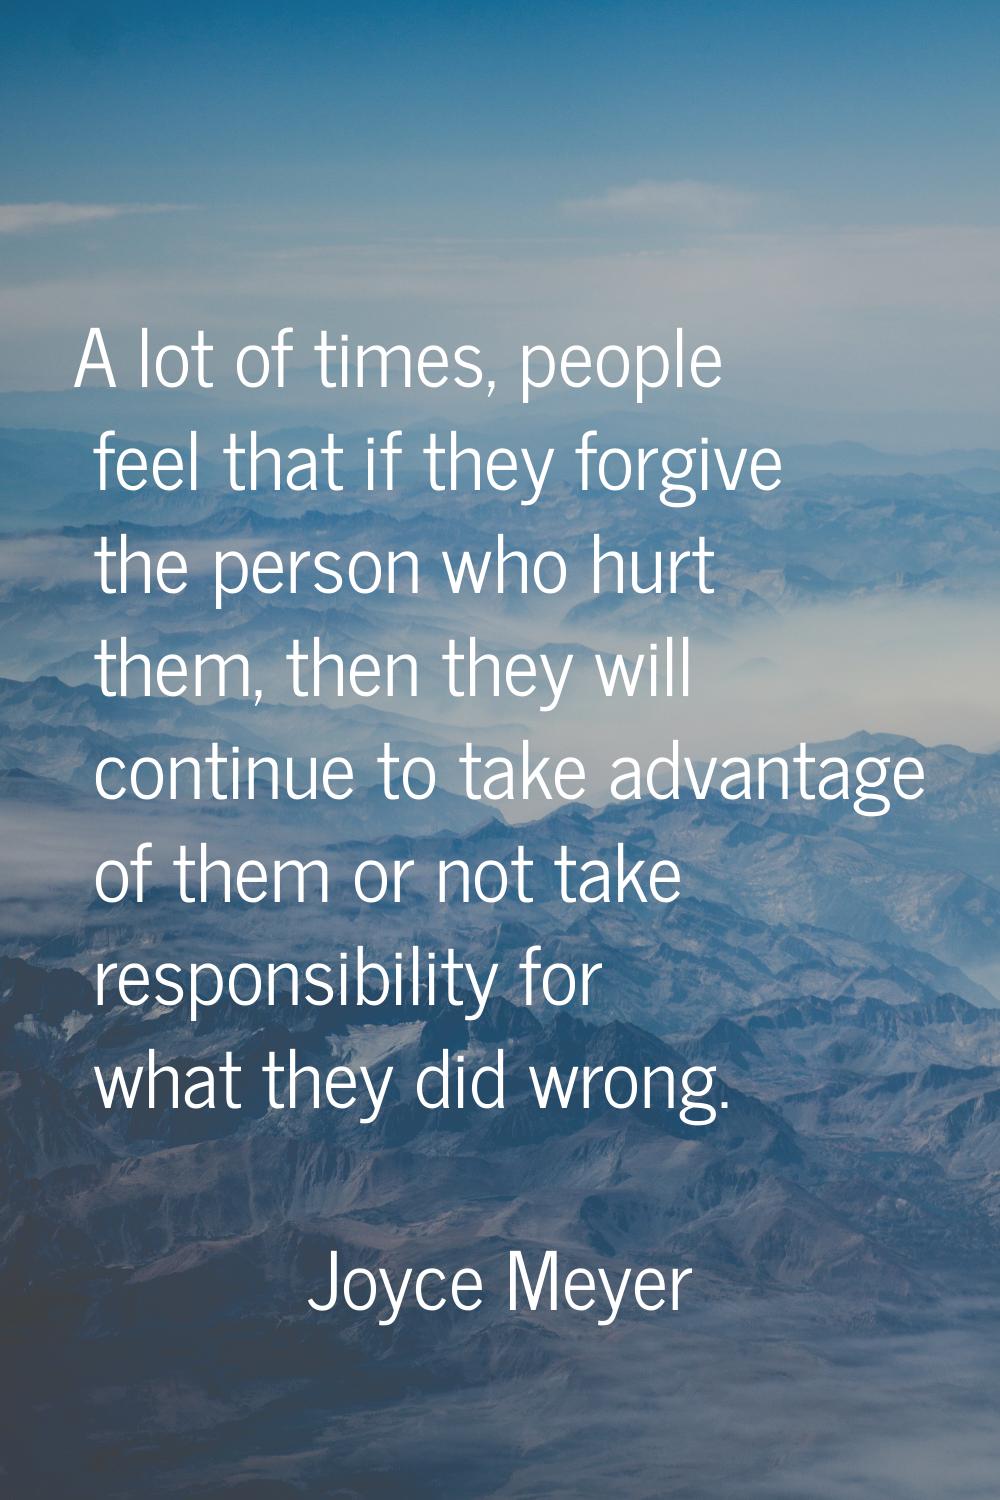 A lot of times, people feel that if they forgive the person who hurt them, then they will continue 